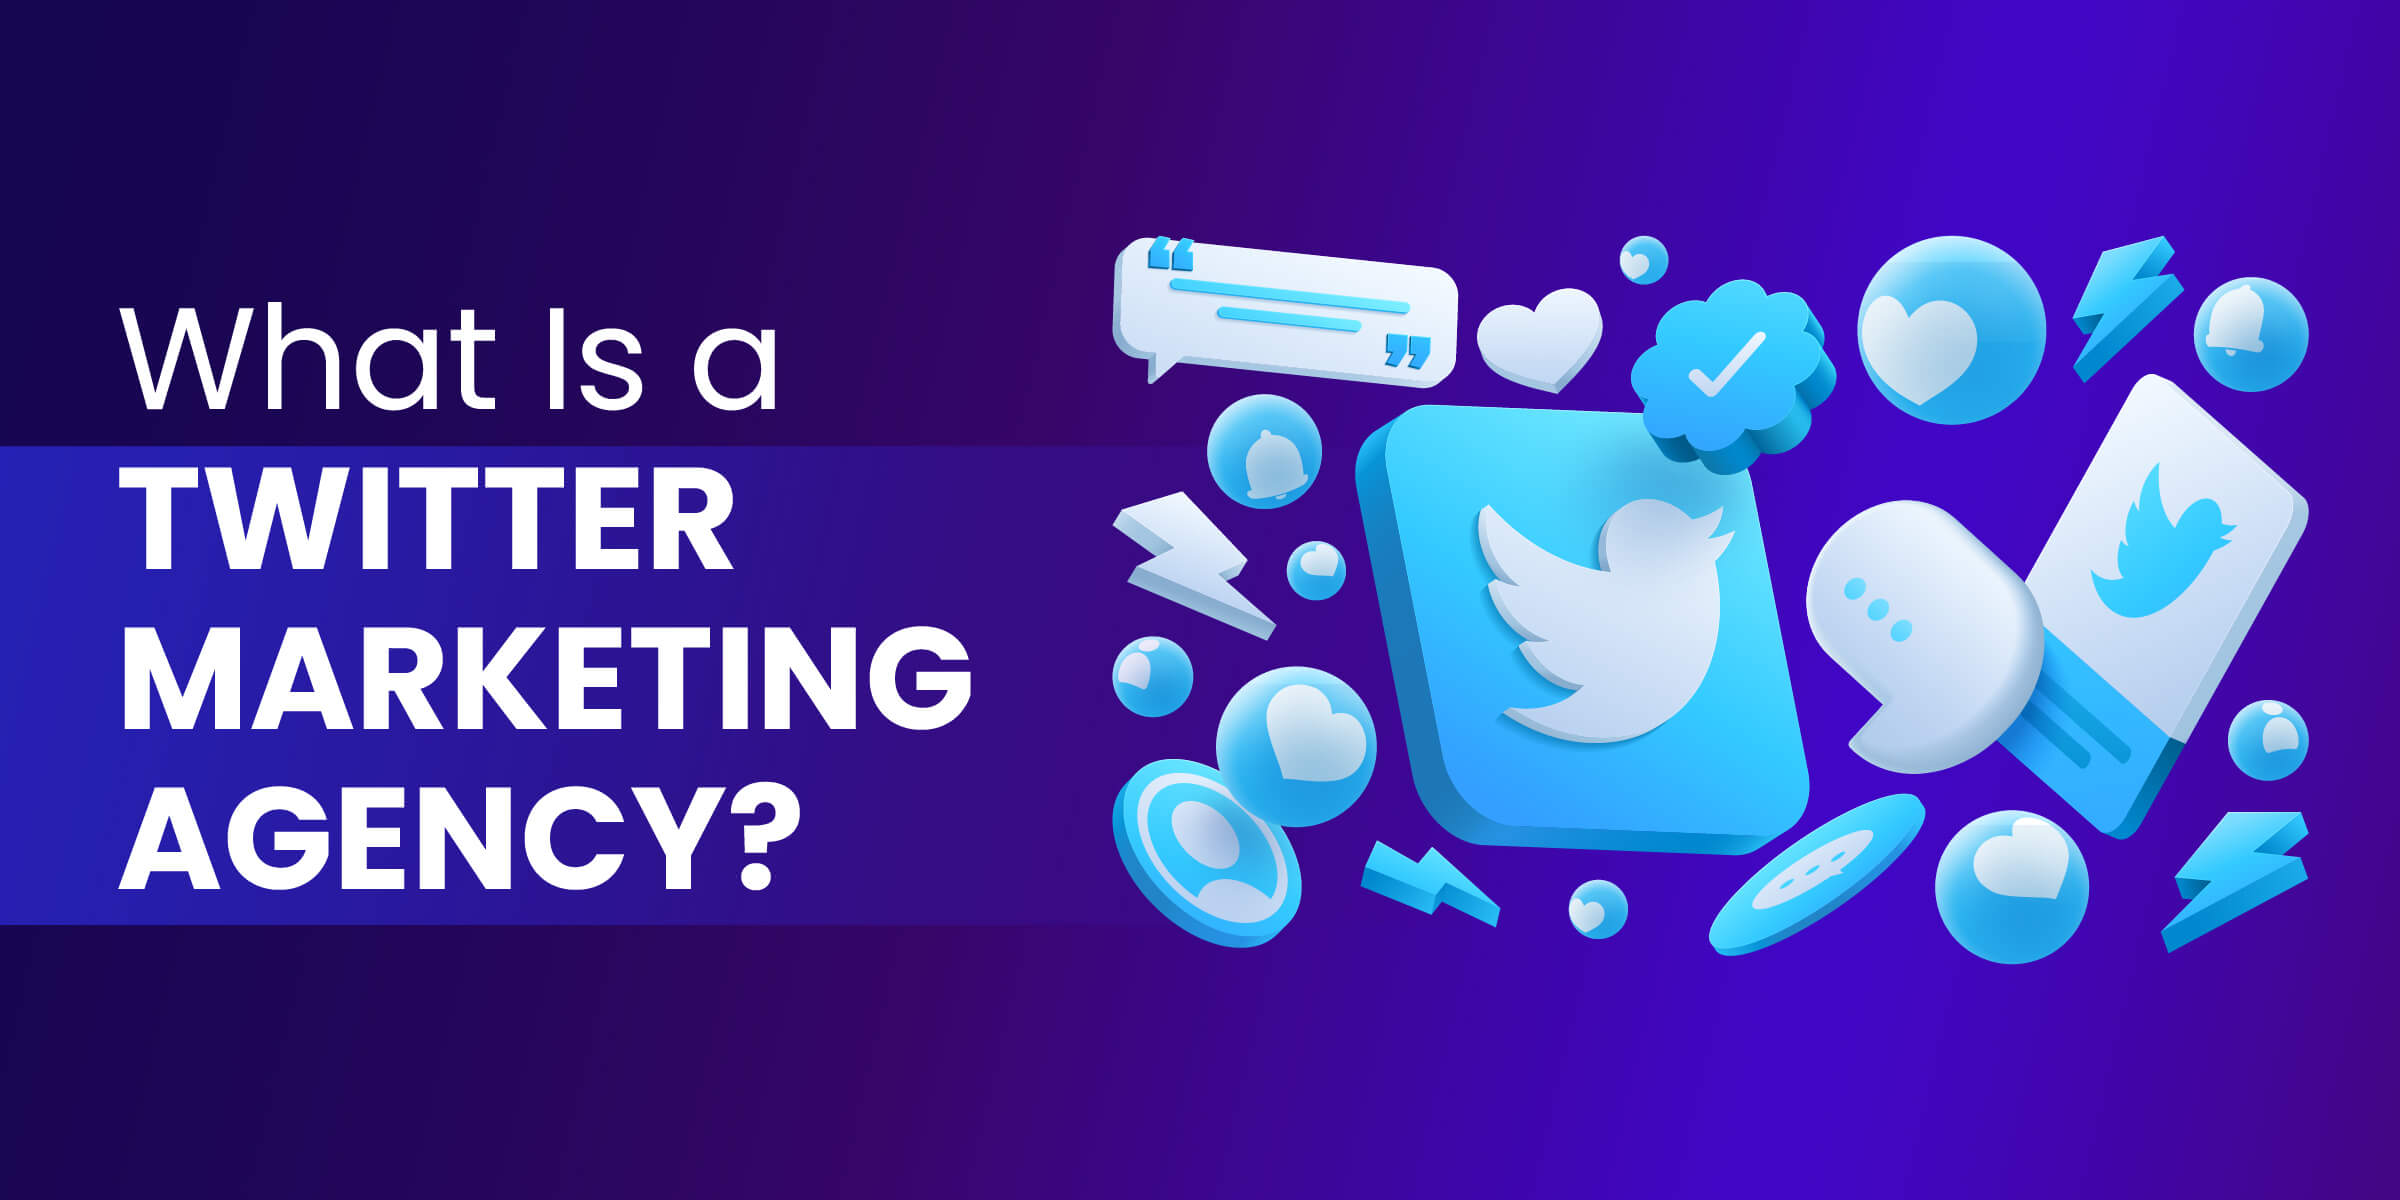 What is a Twitter Marketing Agency